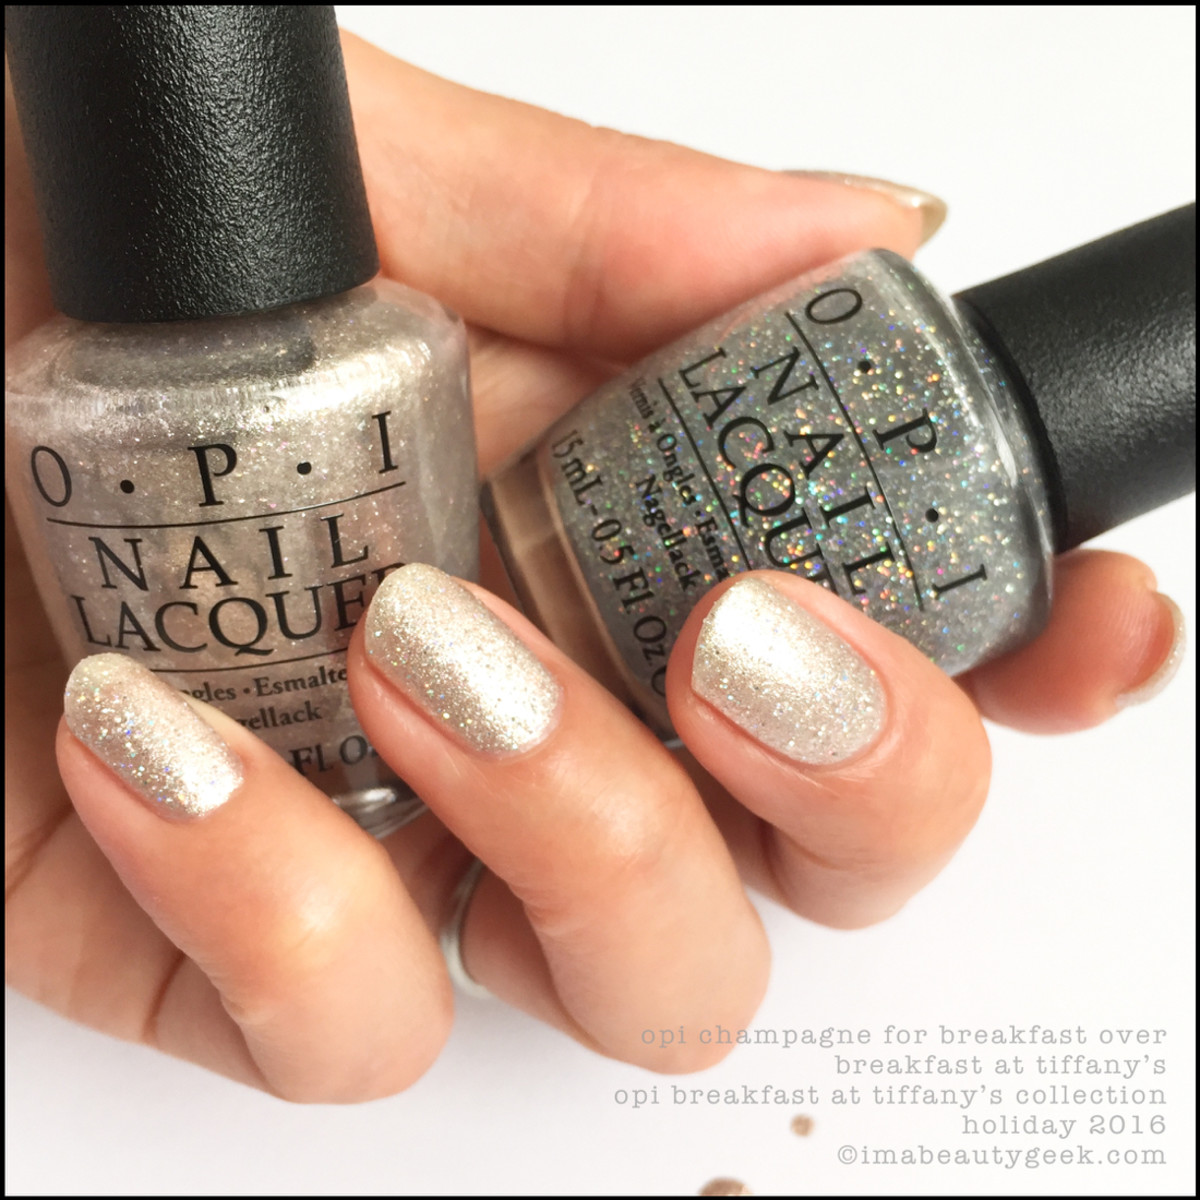 OPI Champagne for Breakfast over_OPI Breakfast at Tiffanys Collection Swatches Review Holiday 2016